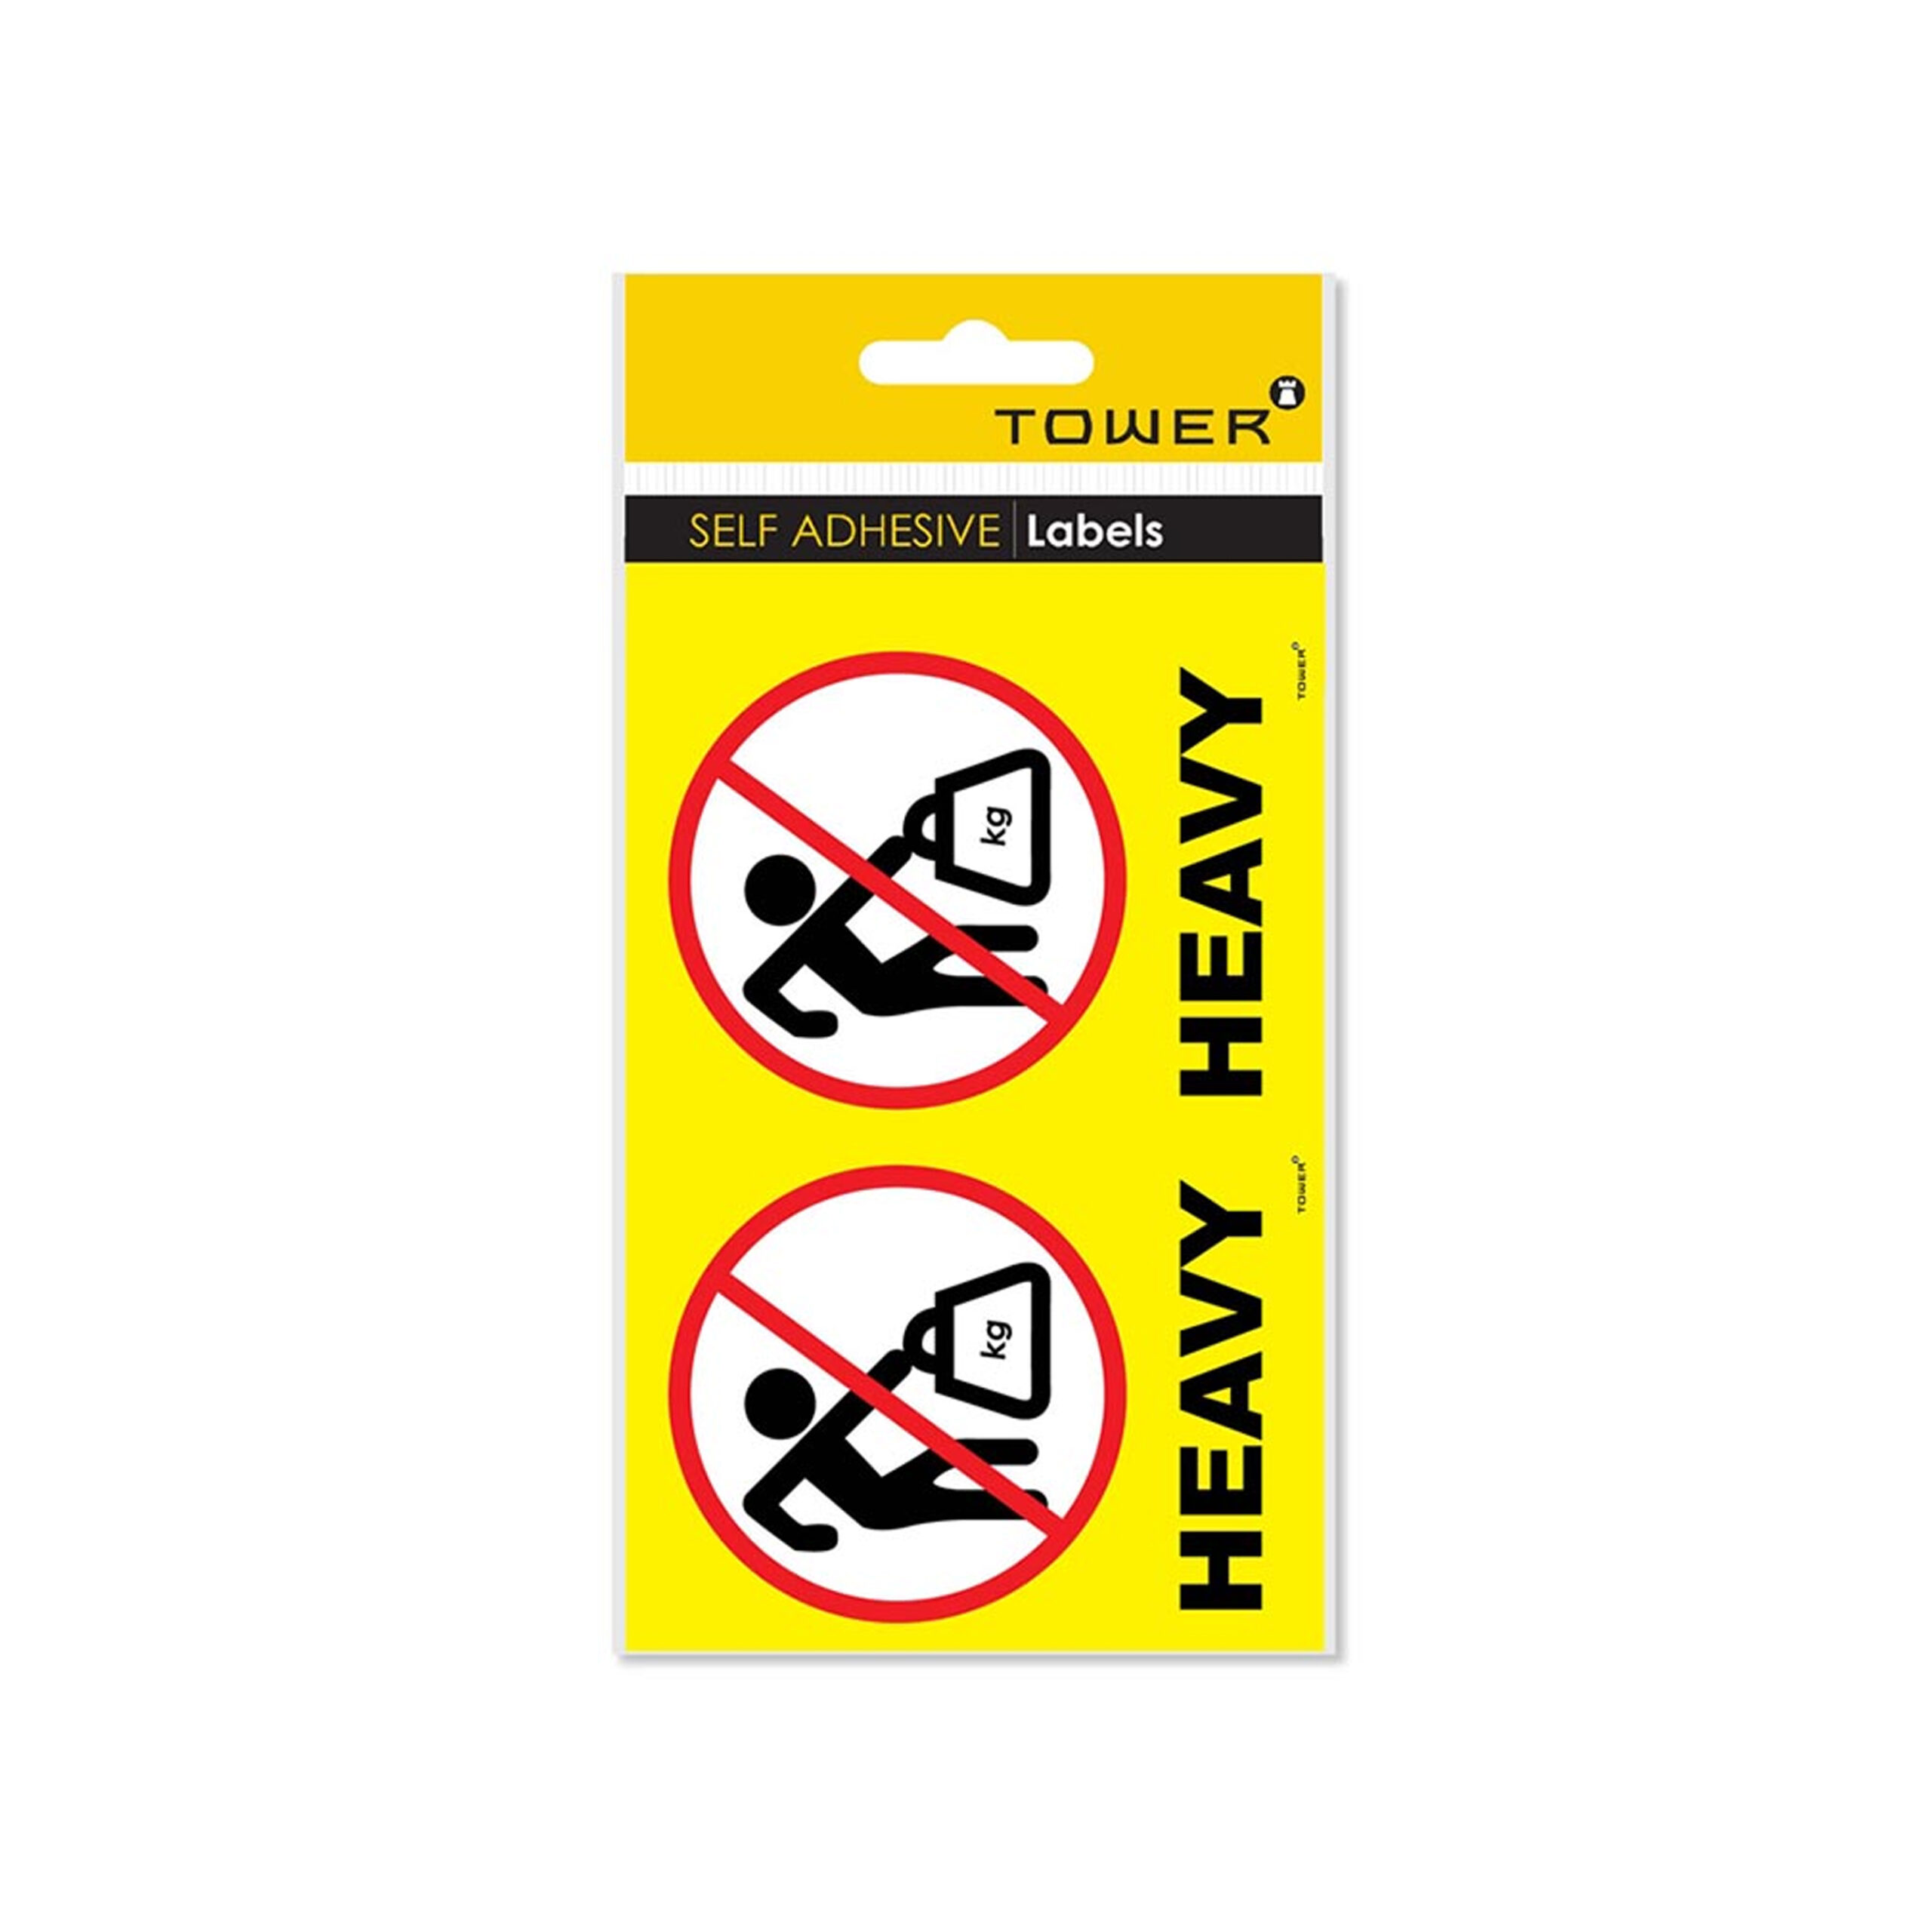 TOWER SELF
ADHESIVE"HEAVY"
FREIGHT LABELS
81x110mm(30
LABELS)